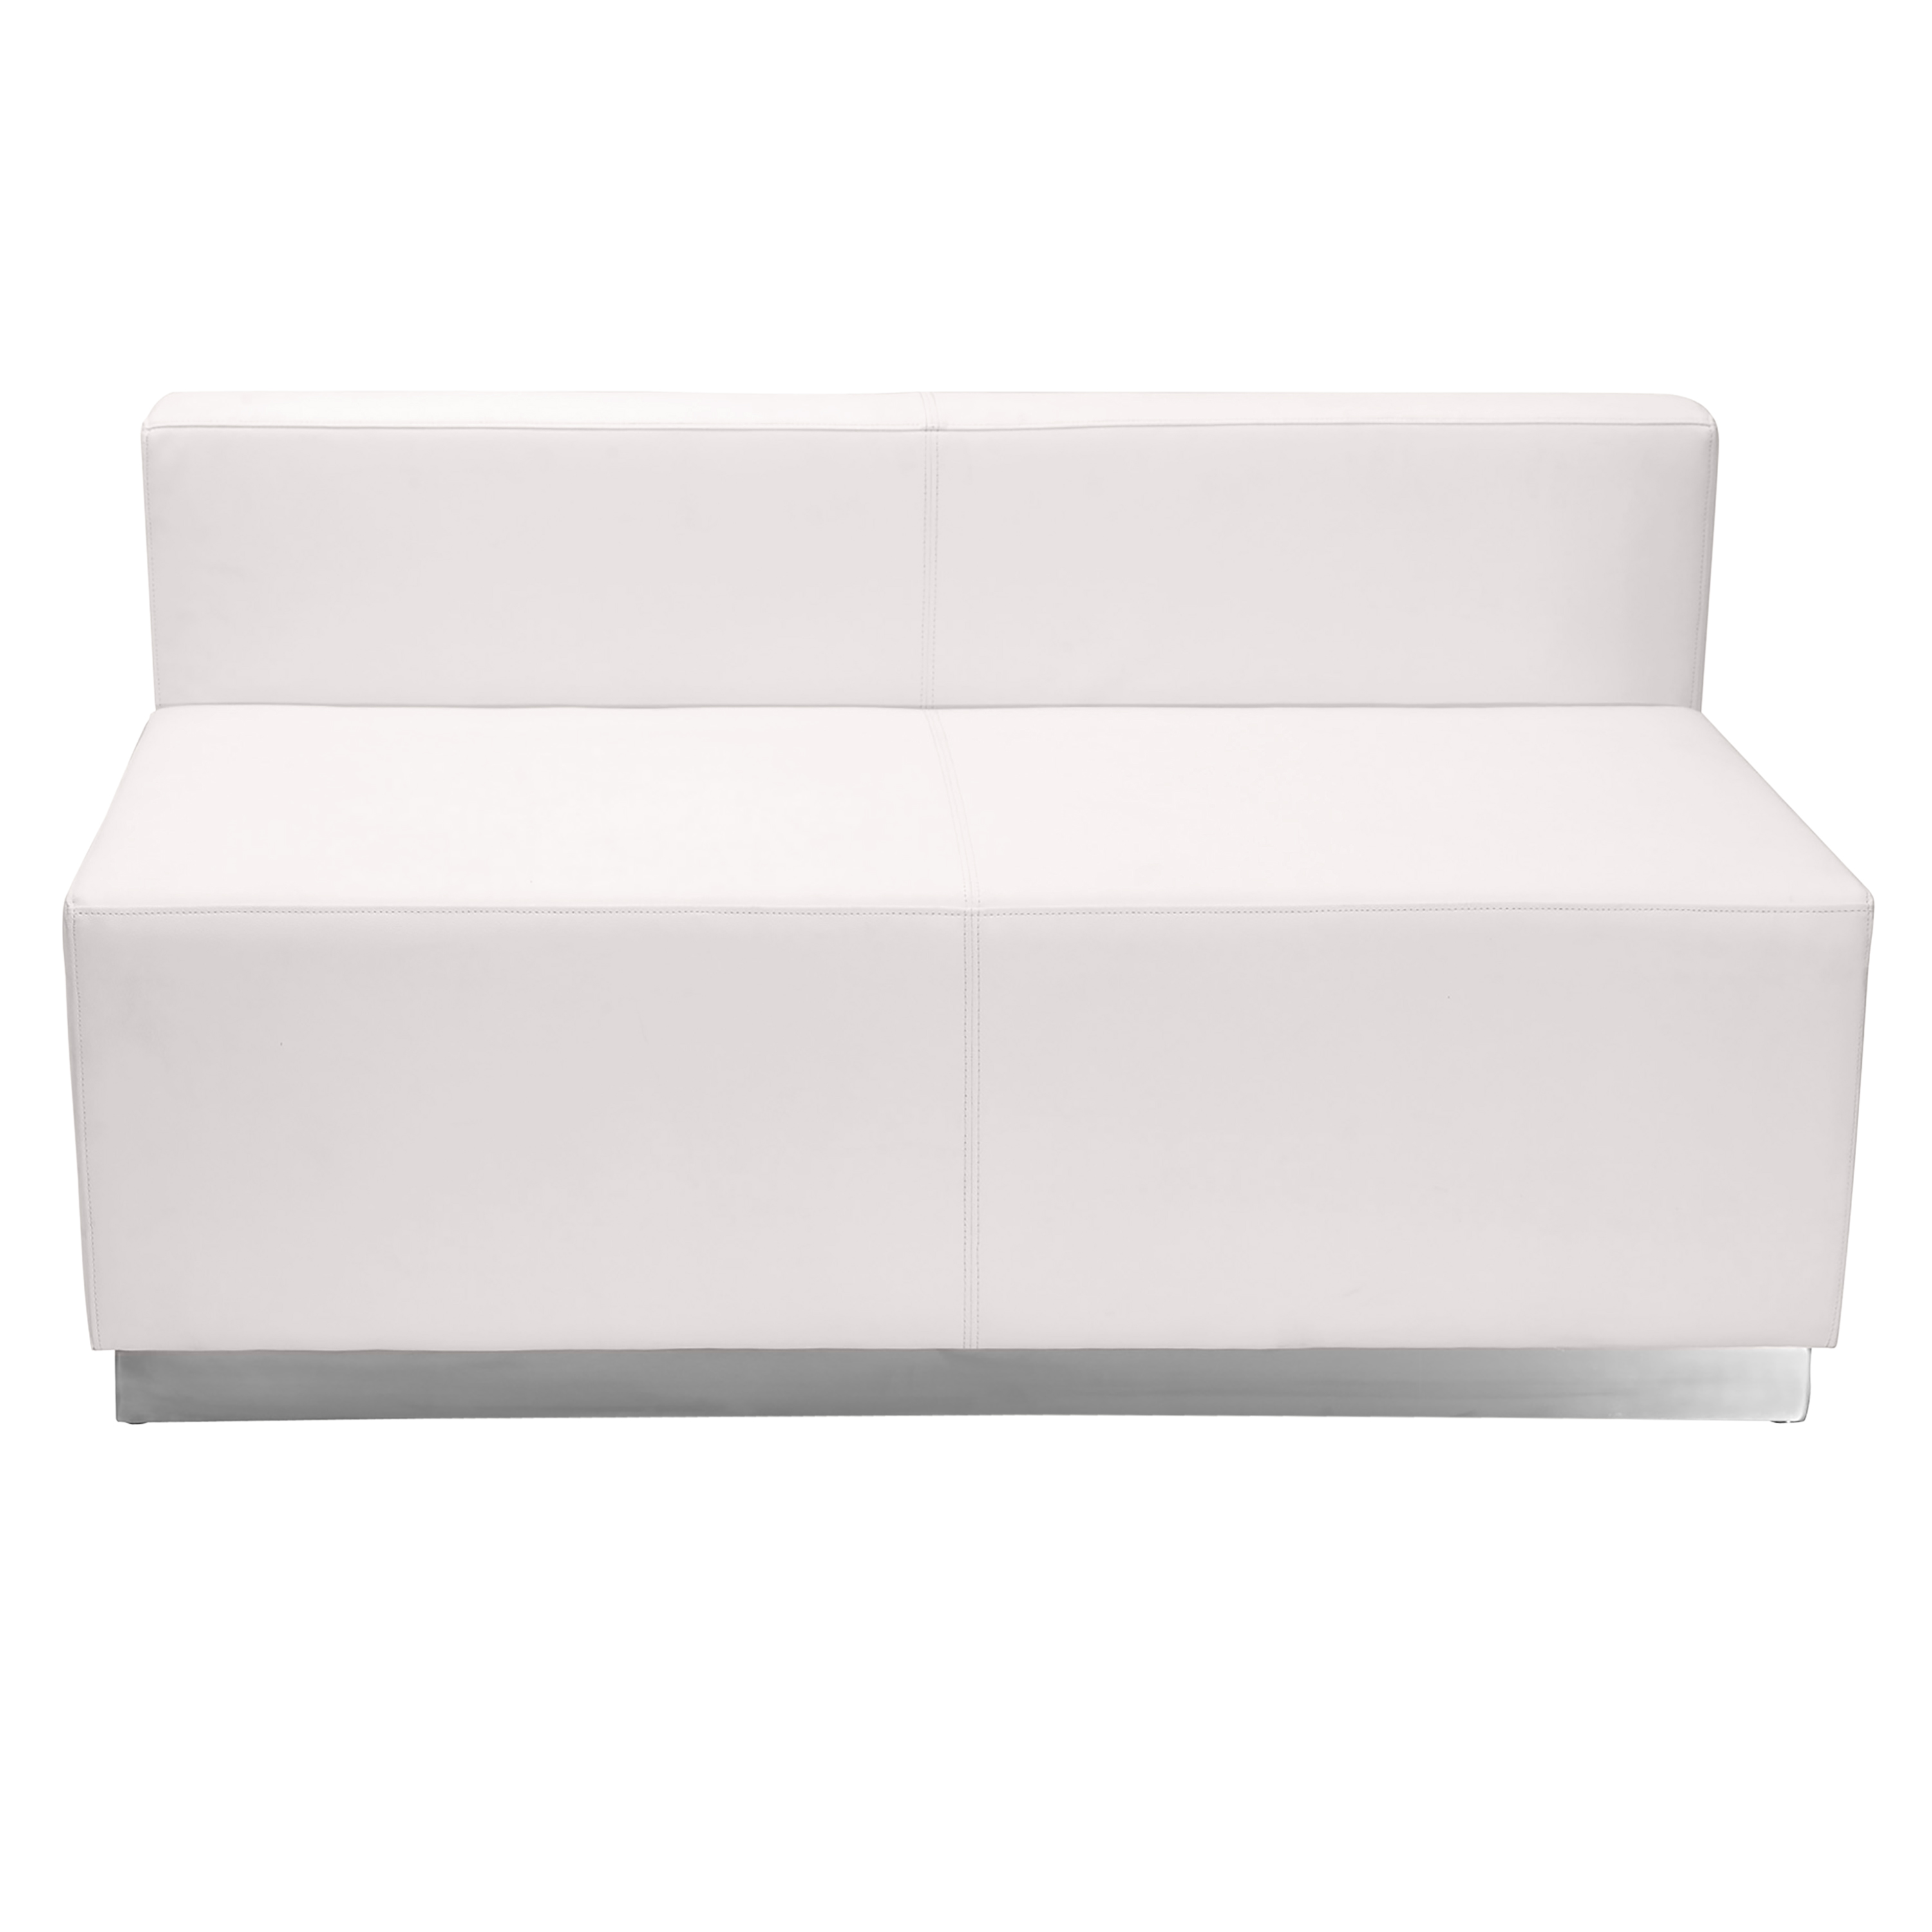 Flash Furniture ZB-803-LS-WH-GG White LeatherSoft Loveseat with Brushed Stainless Steel Base